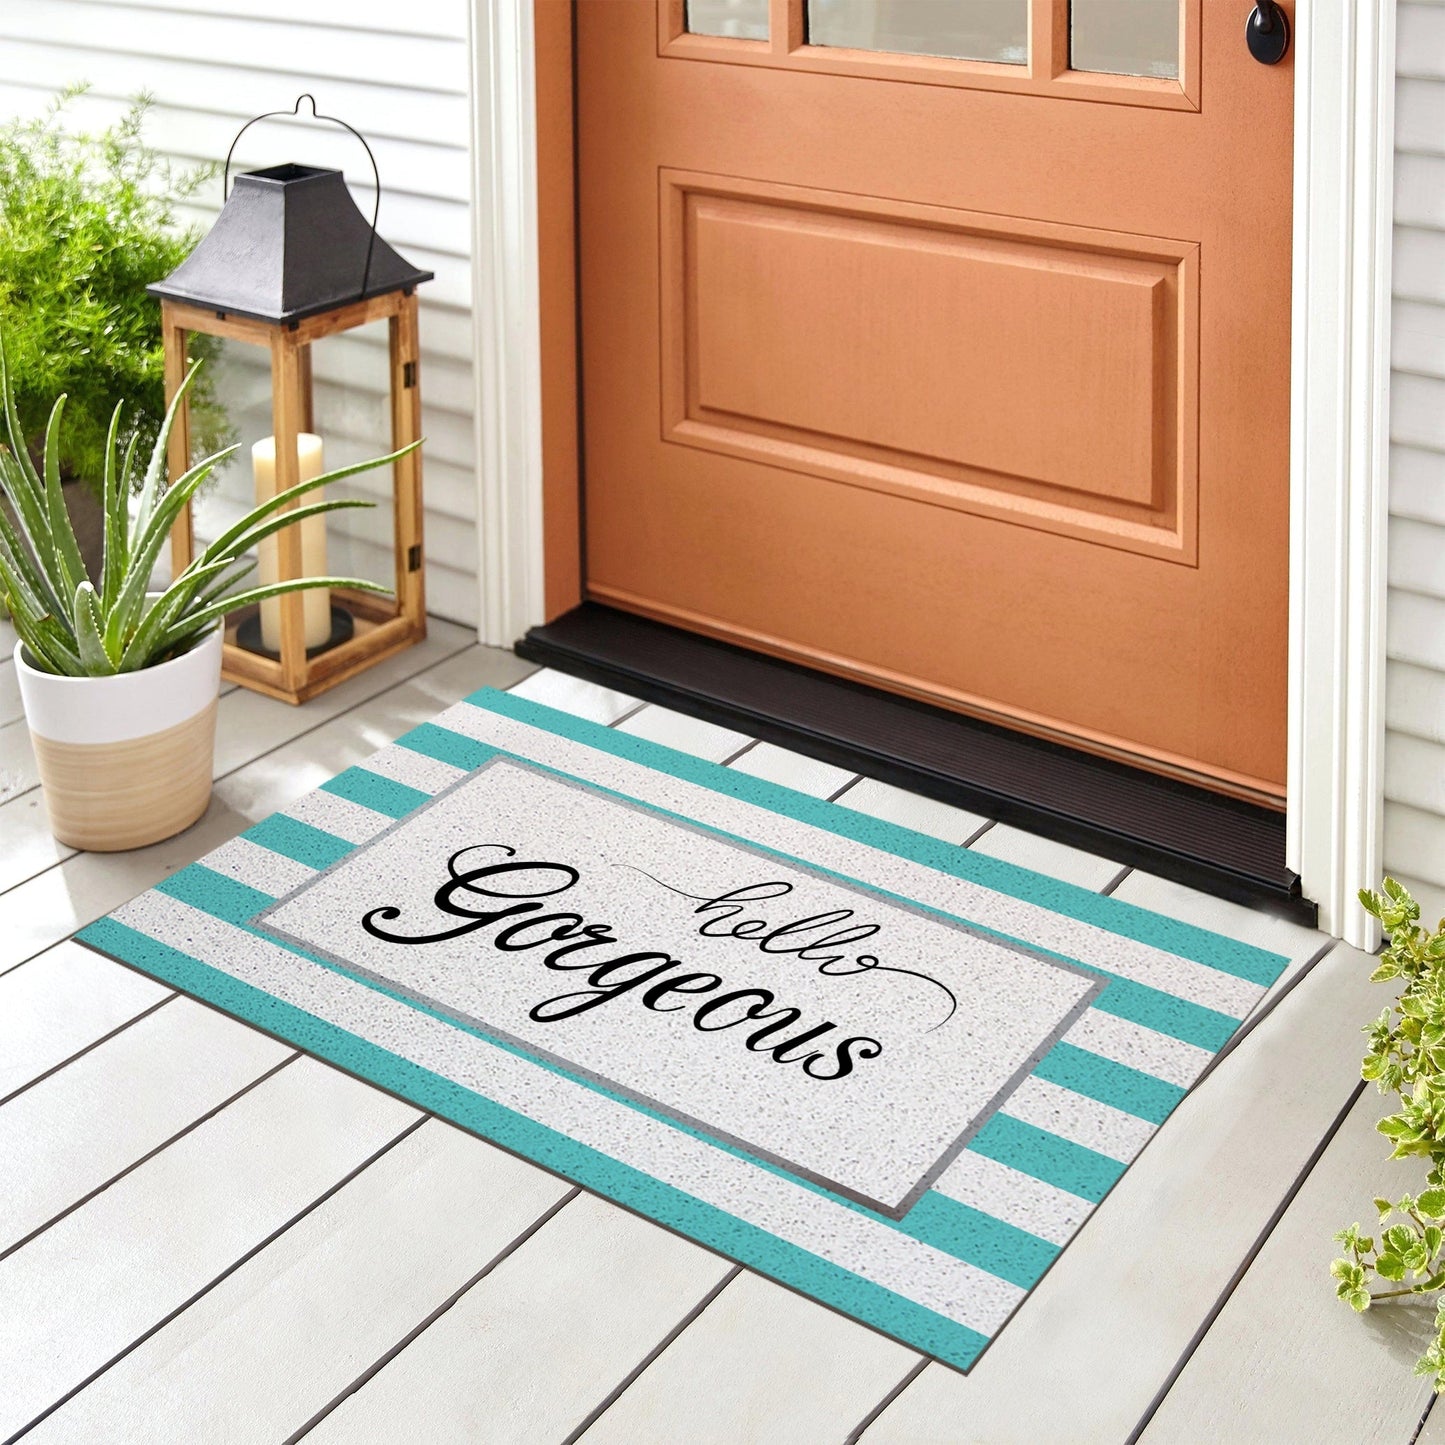 Feblilac Hello Gorgeous Blue Stripe Door Mat, Quotation Welcome Doormat, Anti Skid PVC Coil Outdoor Mats, Front Mat for Home, Washable Entryway Doormat